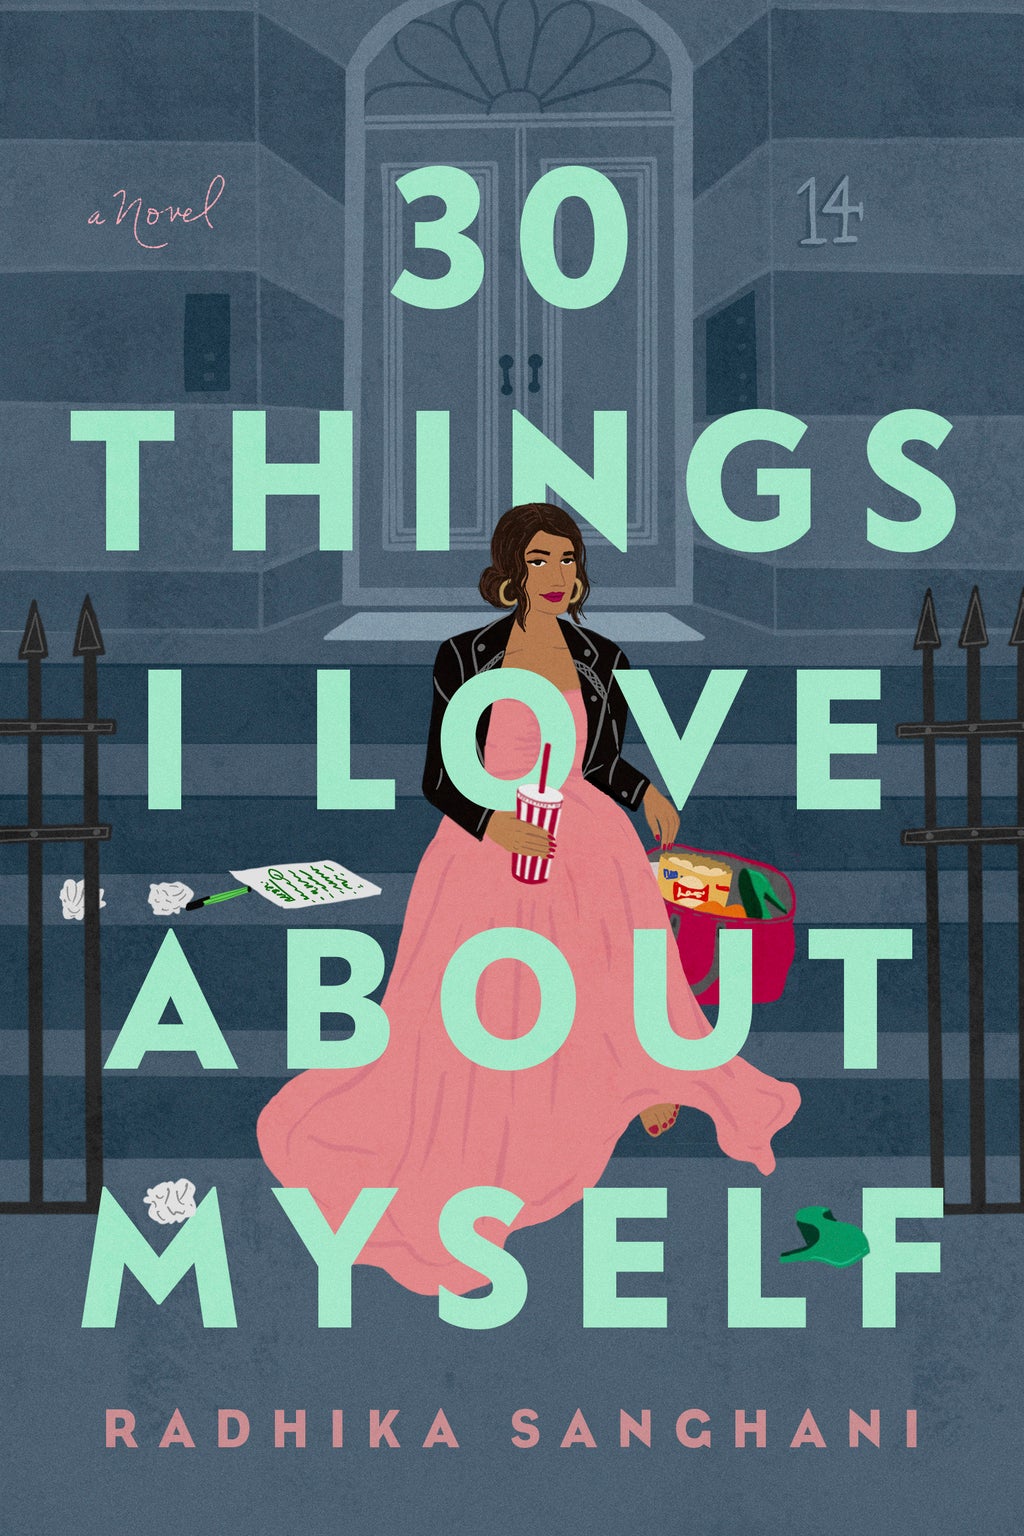 Review: 30 Things I Love About Myself a fulfilling journey